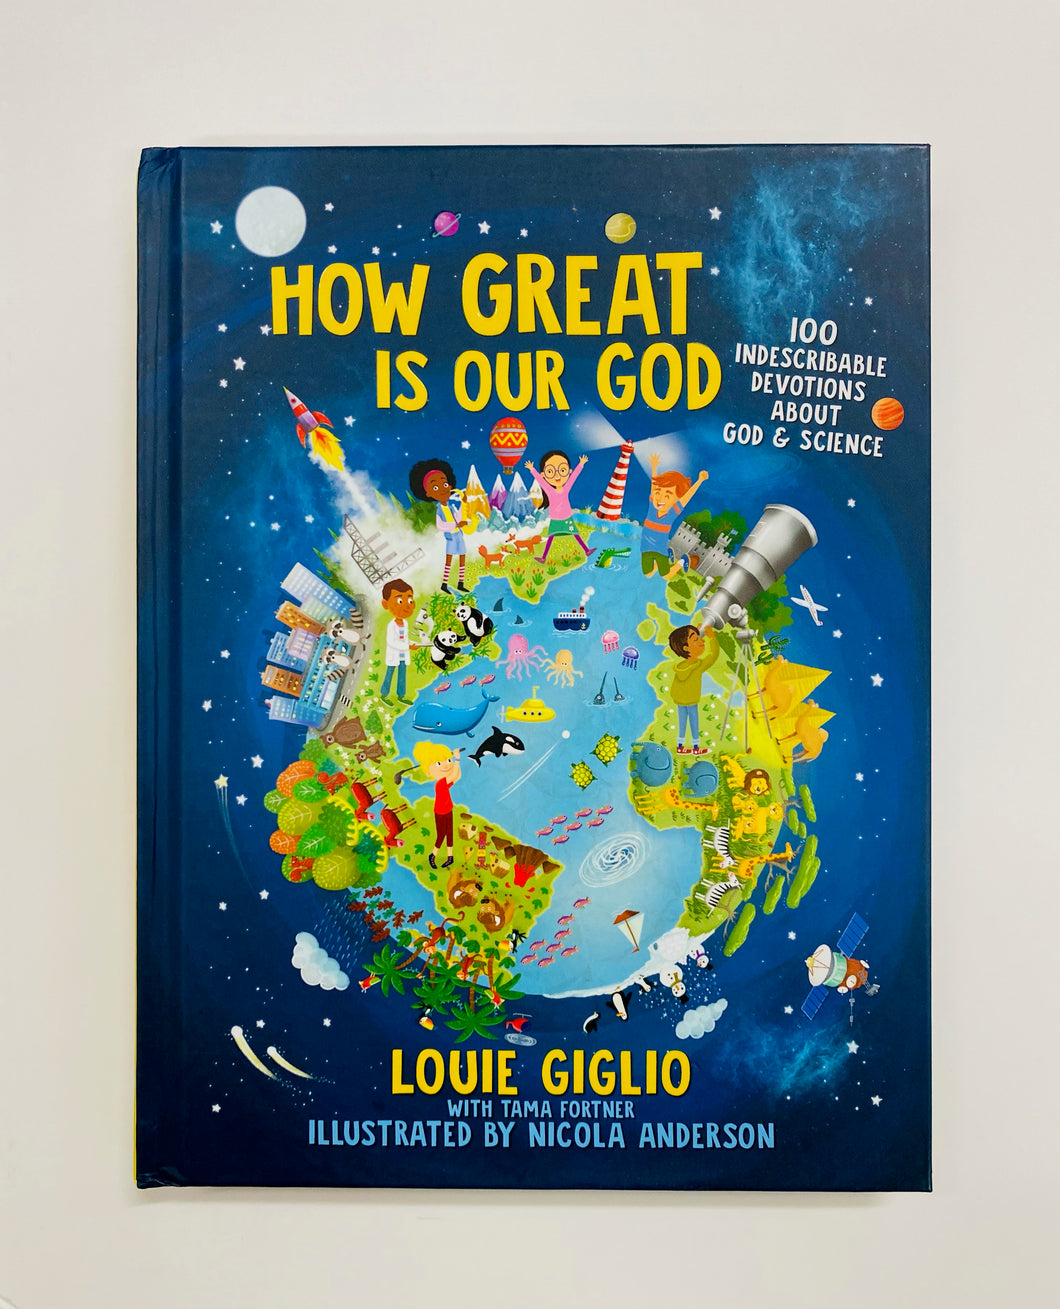 How Great is Our God. 100 Indescribable Devotions about God and Science